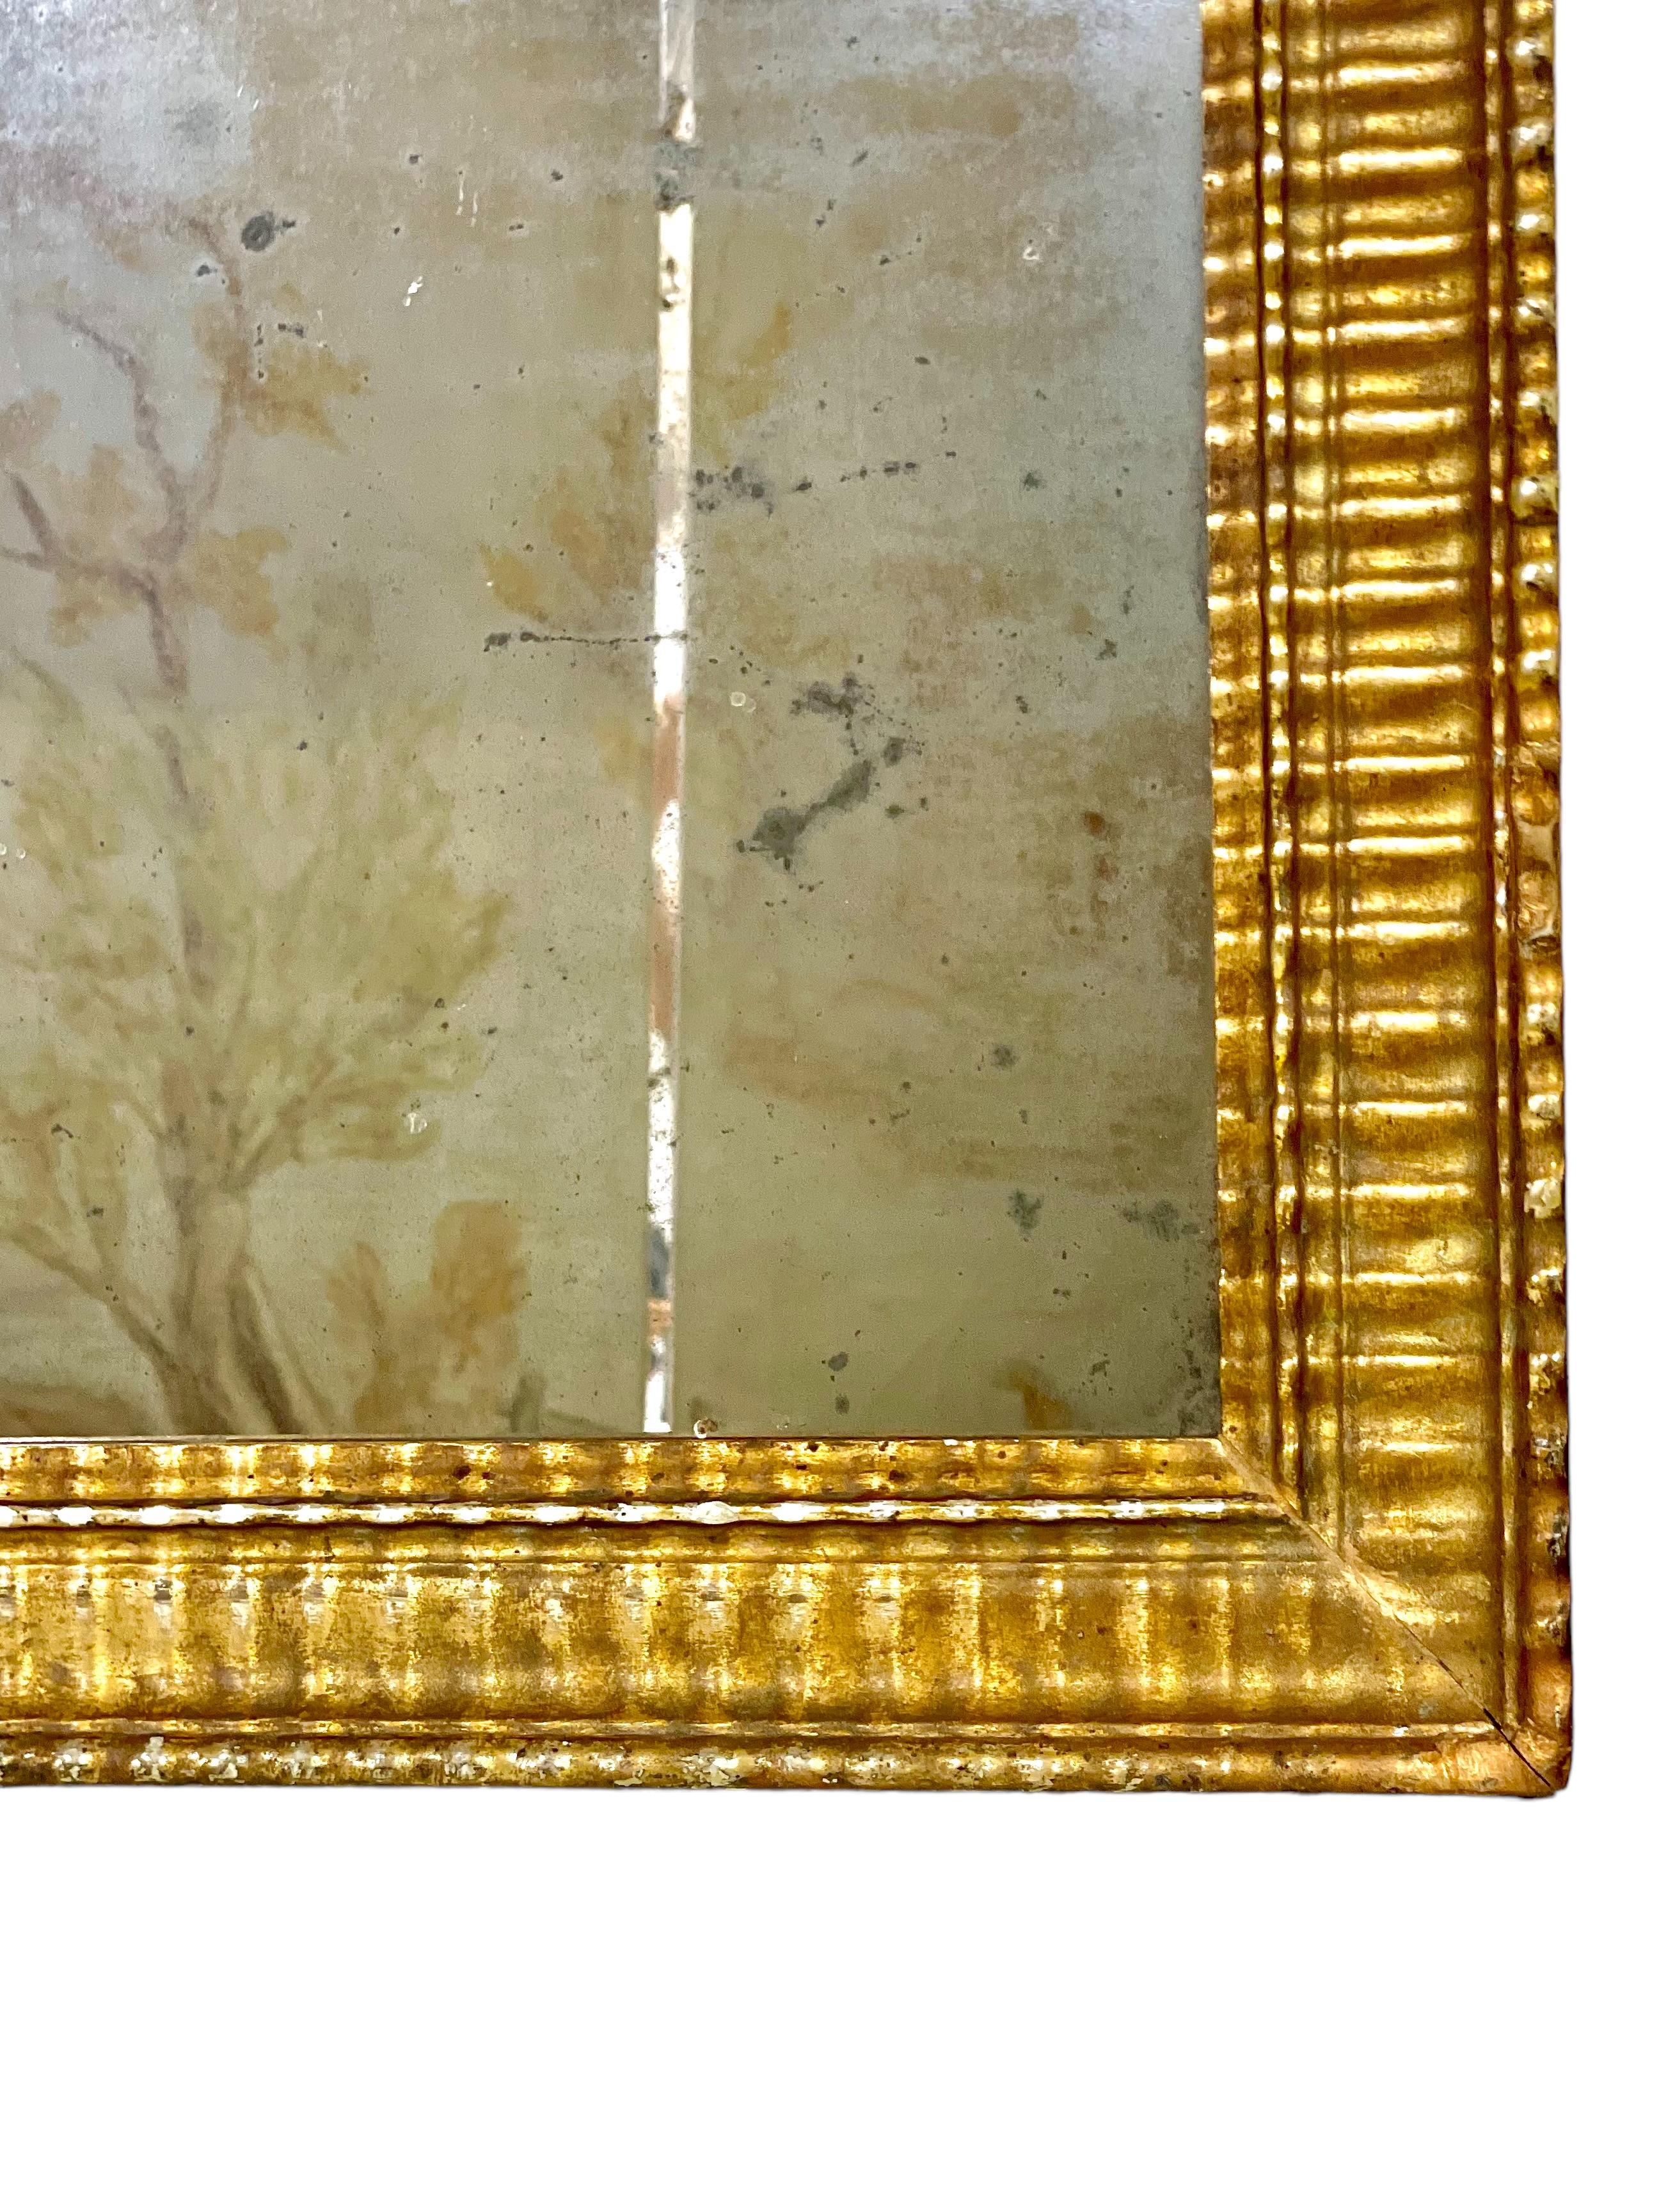 A very fine Louis Philippe rectangular mirror in a wonderful gilt wood frame, which has been carved all round in a simple but attractive ribbed or reeded style. Dating from the mid-19th century, this fabulous wall mirror has aged beautifully, its